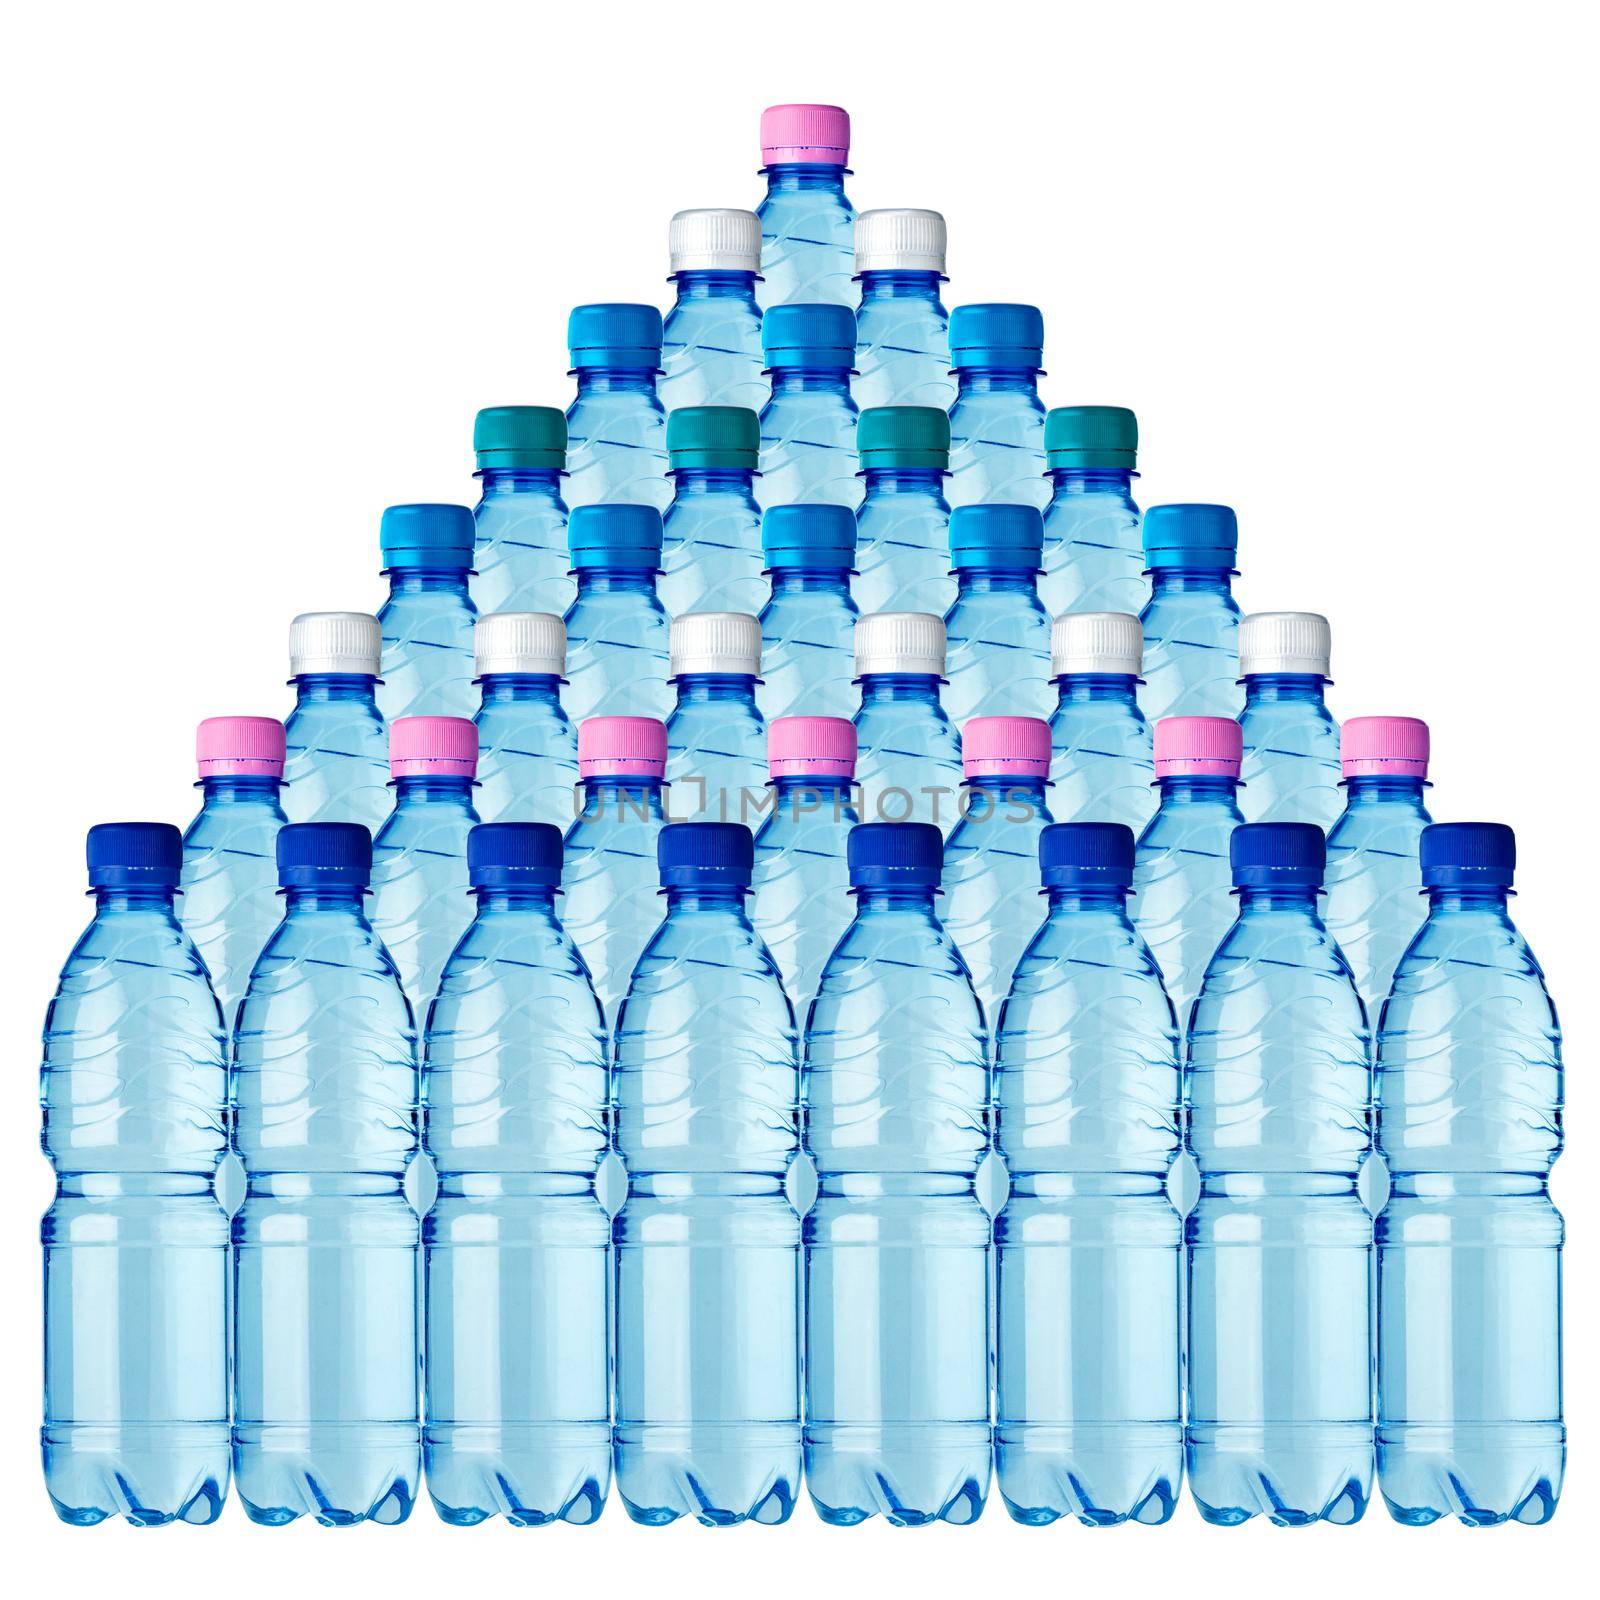 pyramid of 36 bottles of water on a white background